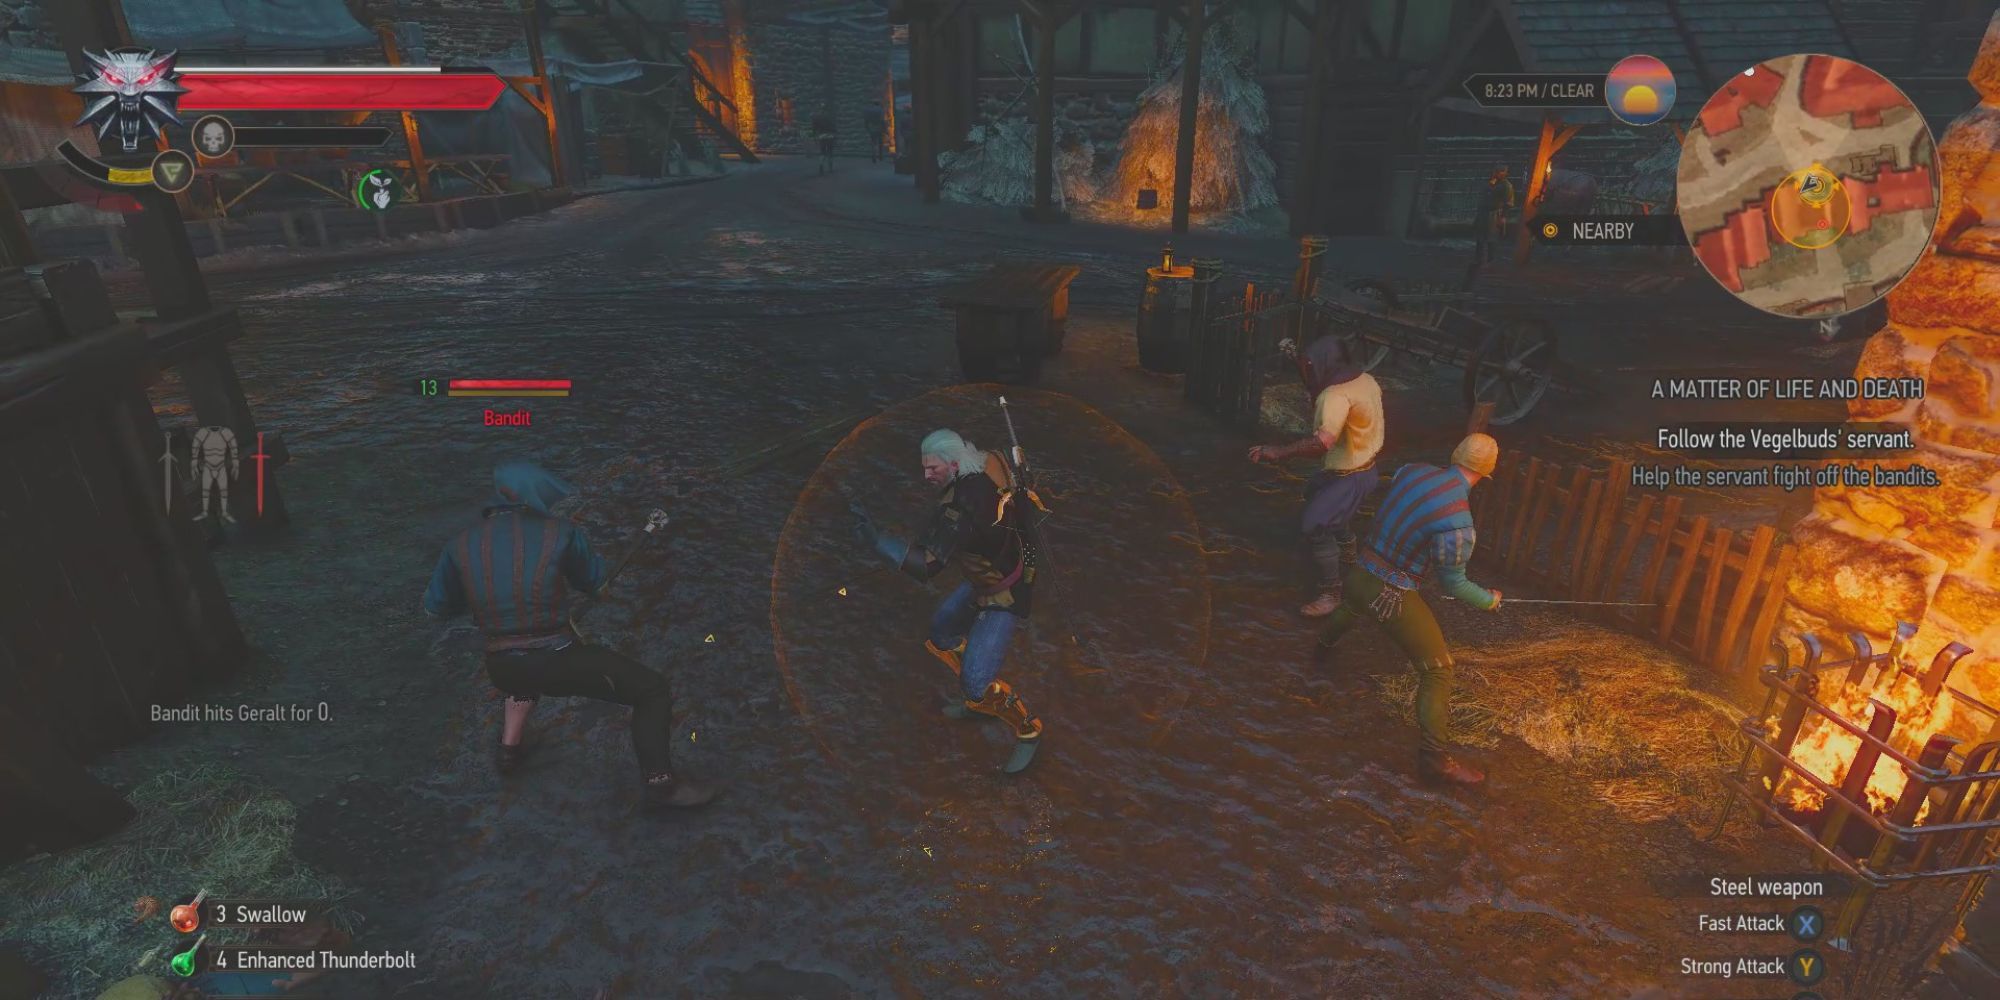 Fighting off thugs The Witcher 3